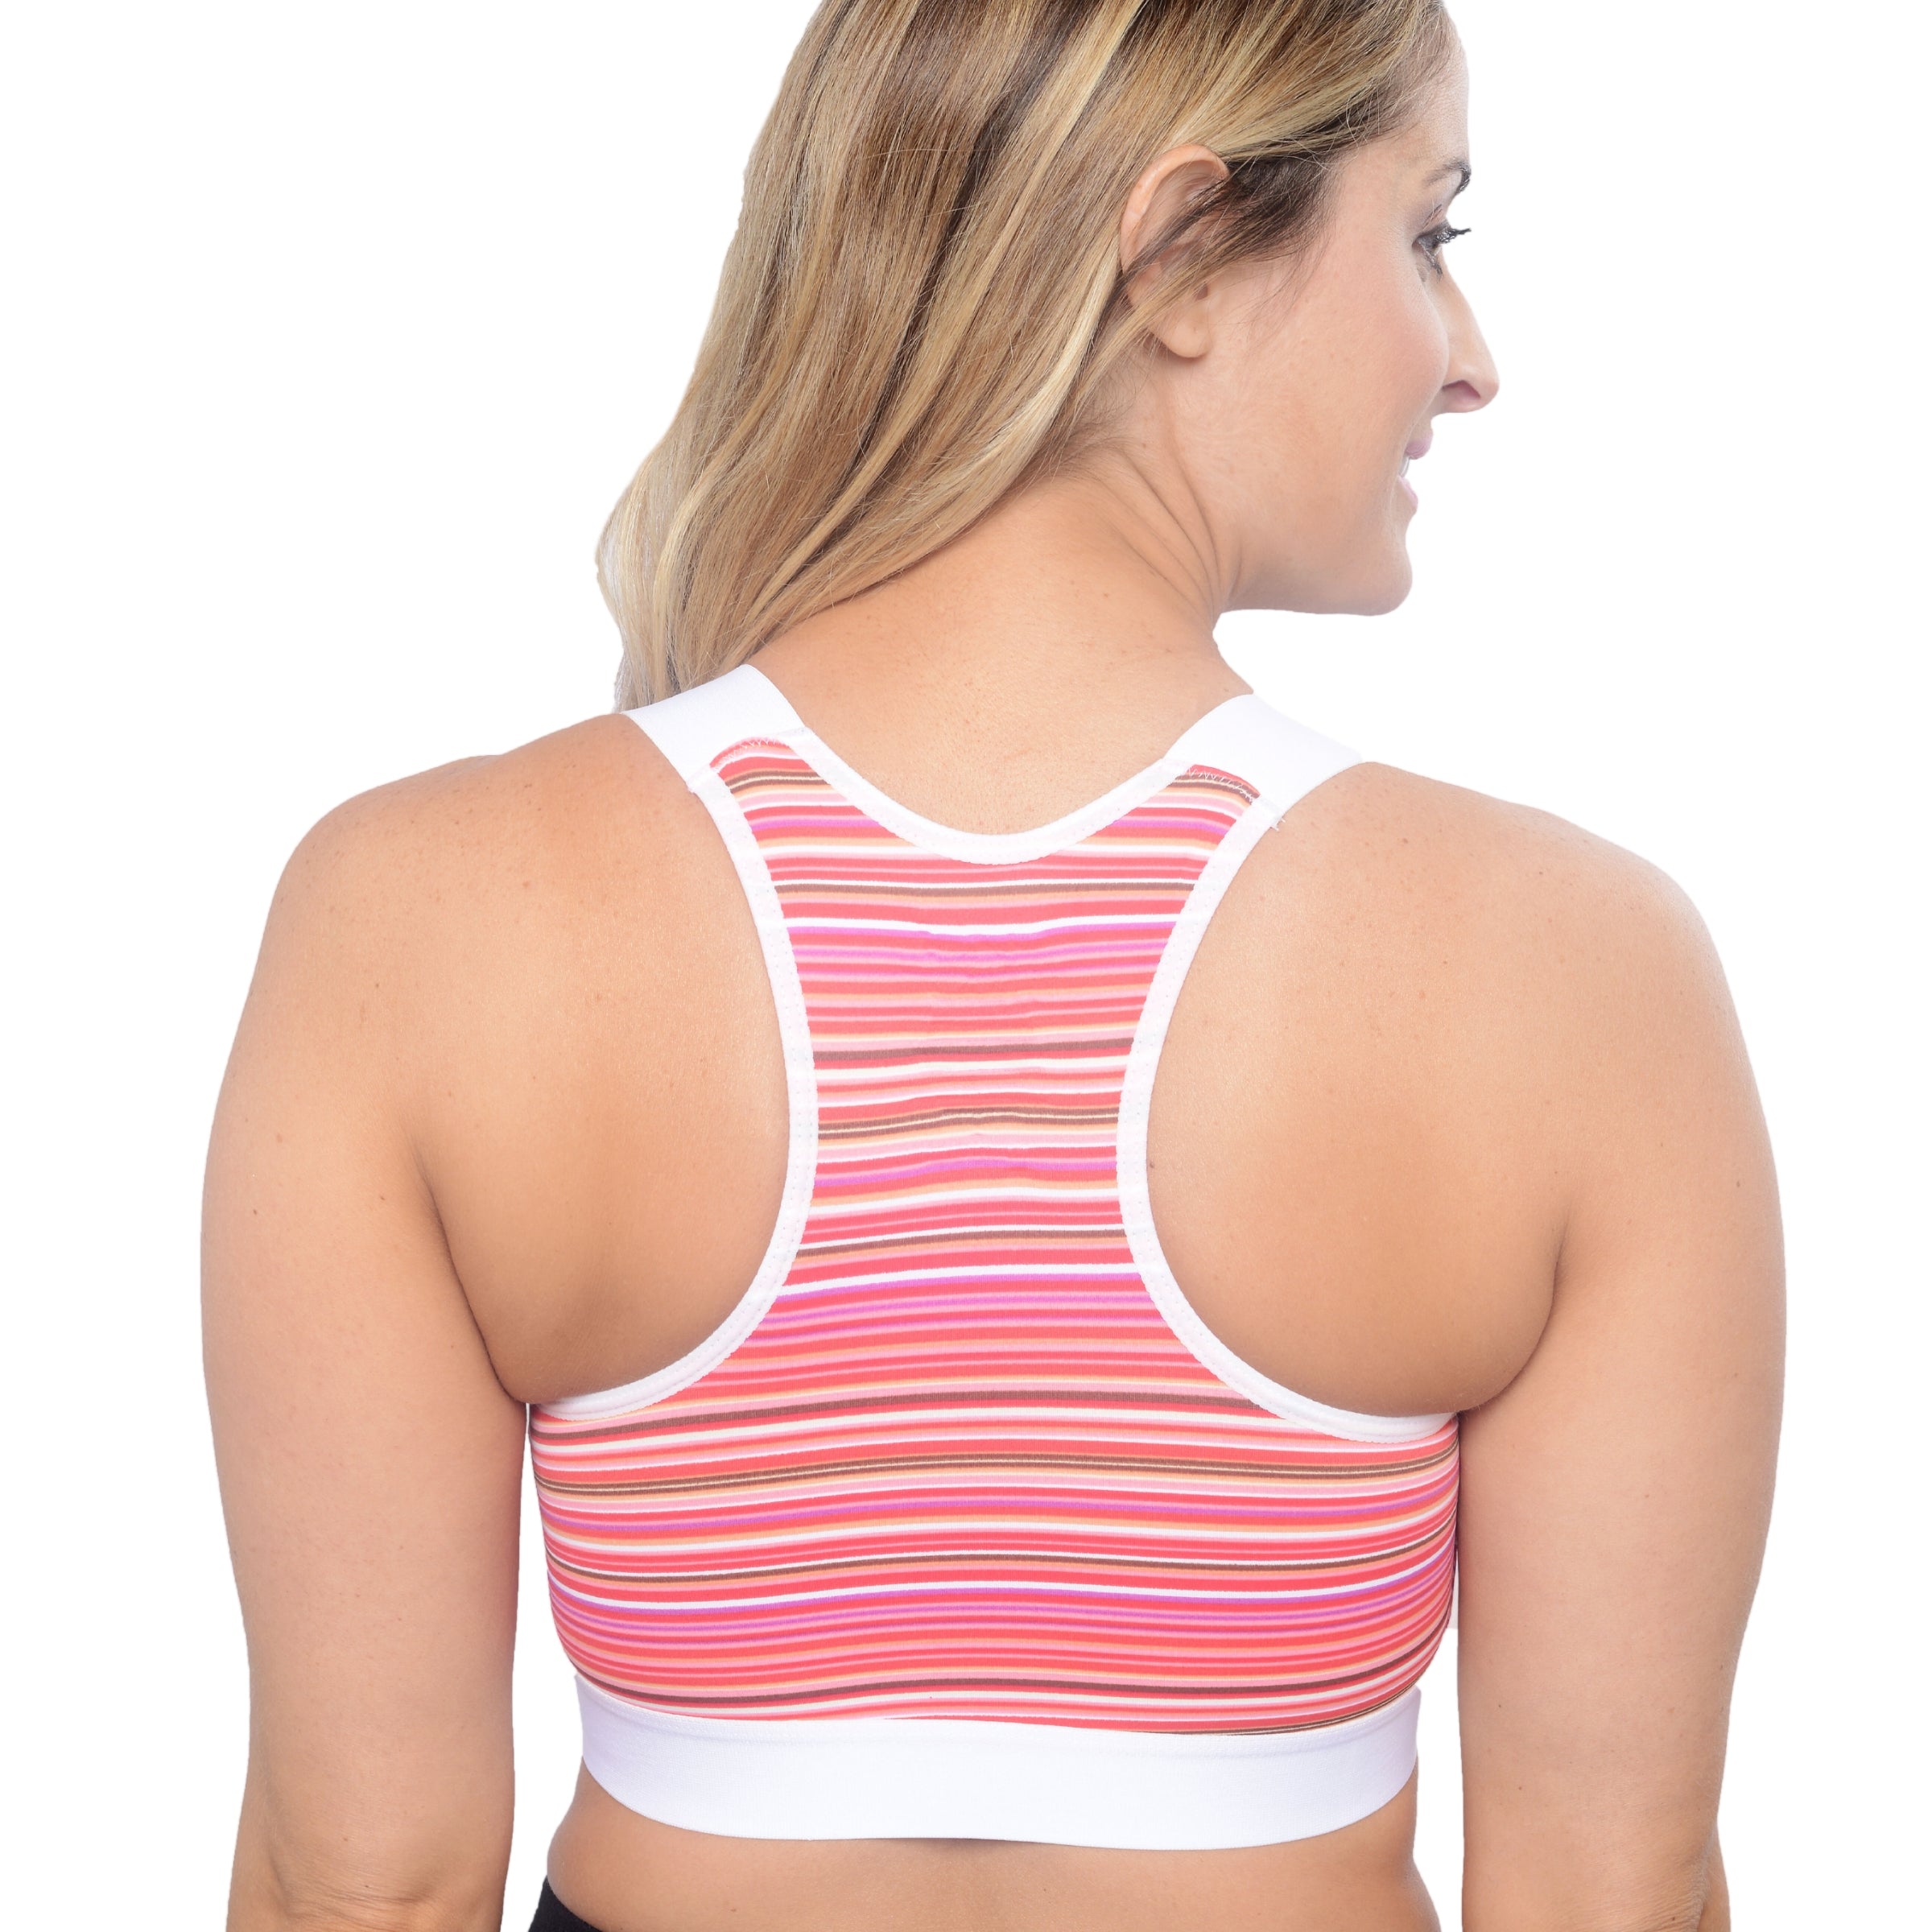 Surgical Support Bra - Red Stripe